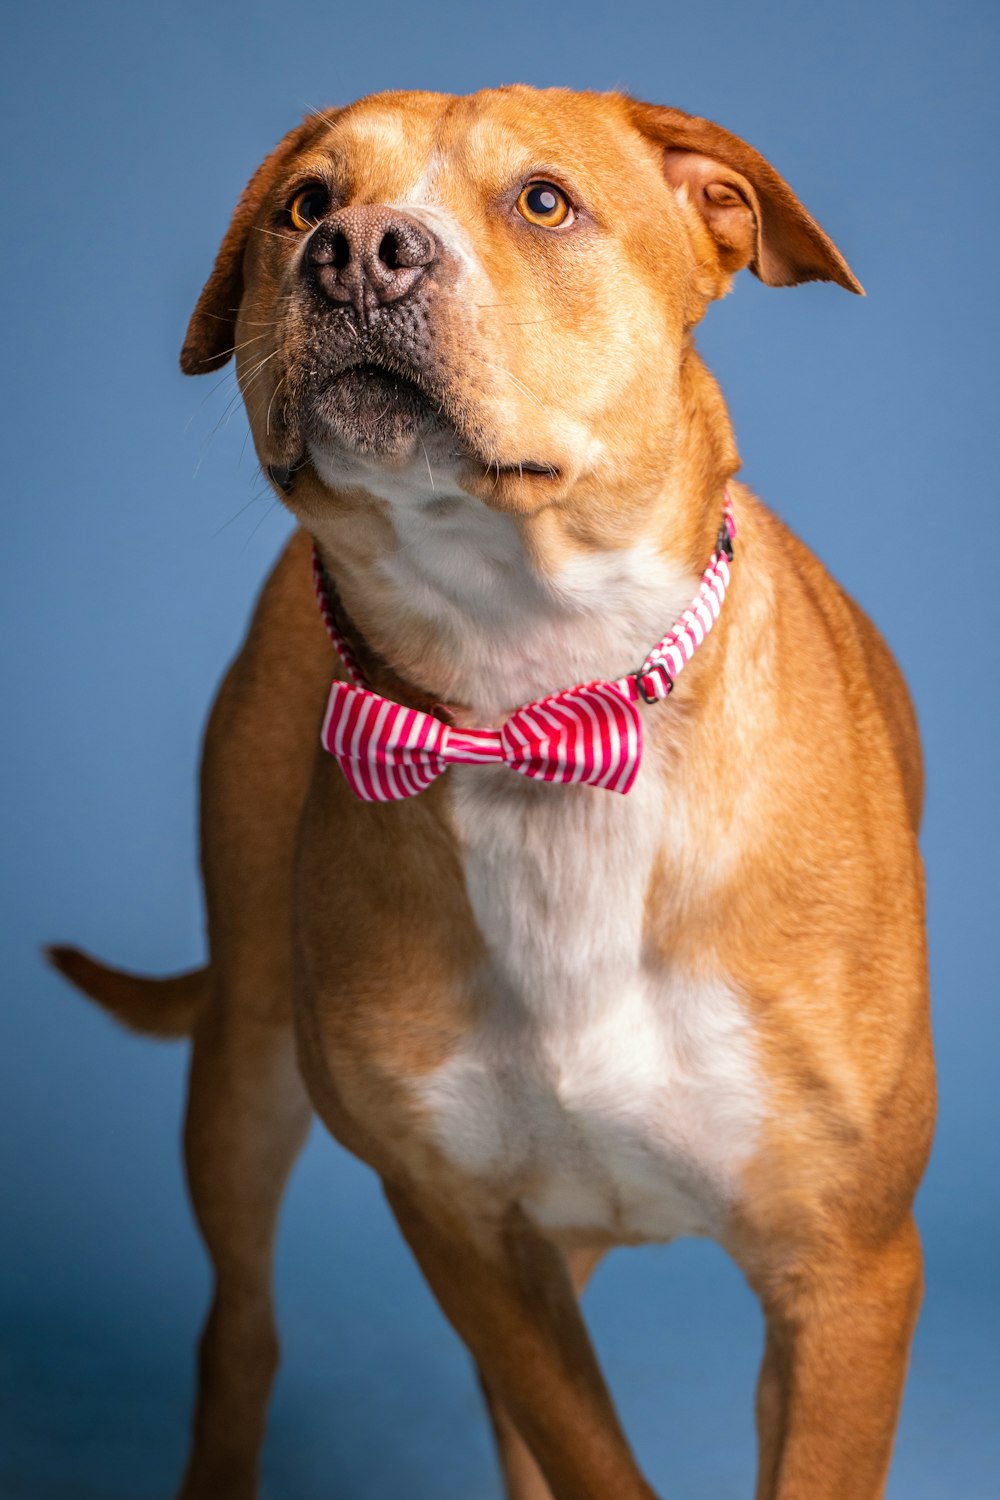 a brown and white dog wearing a red and white striped bow tie